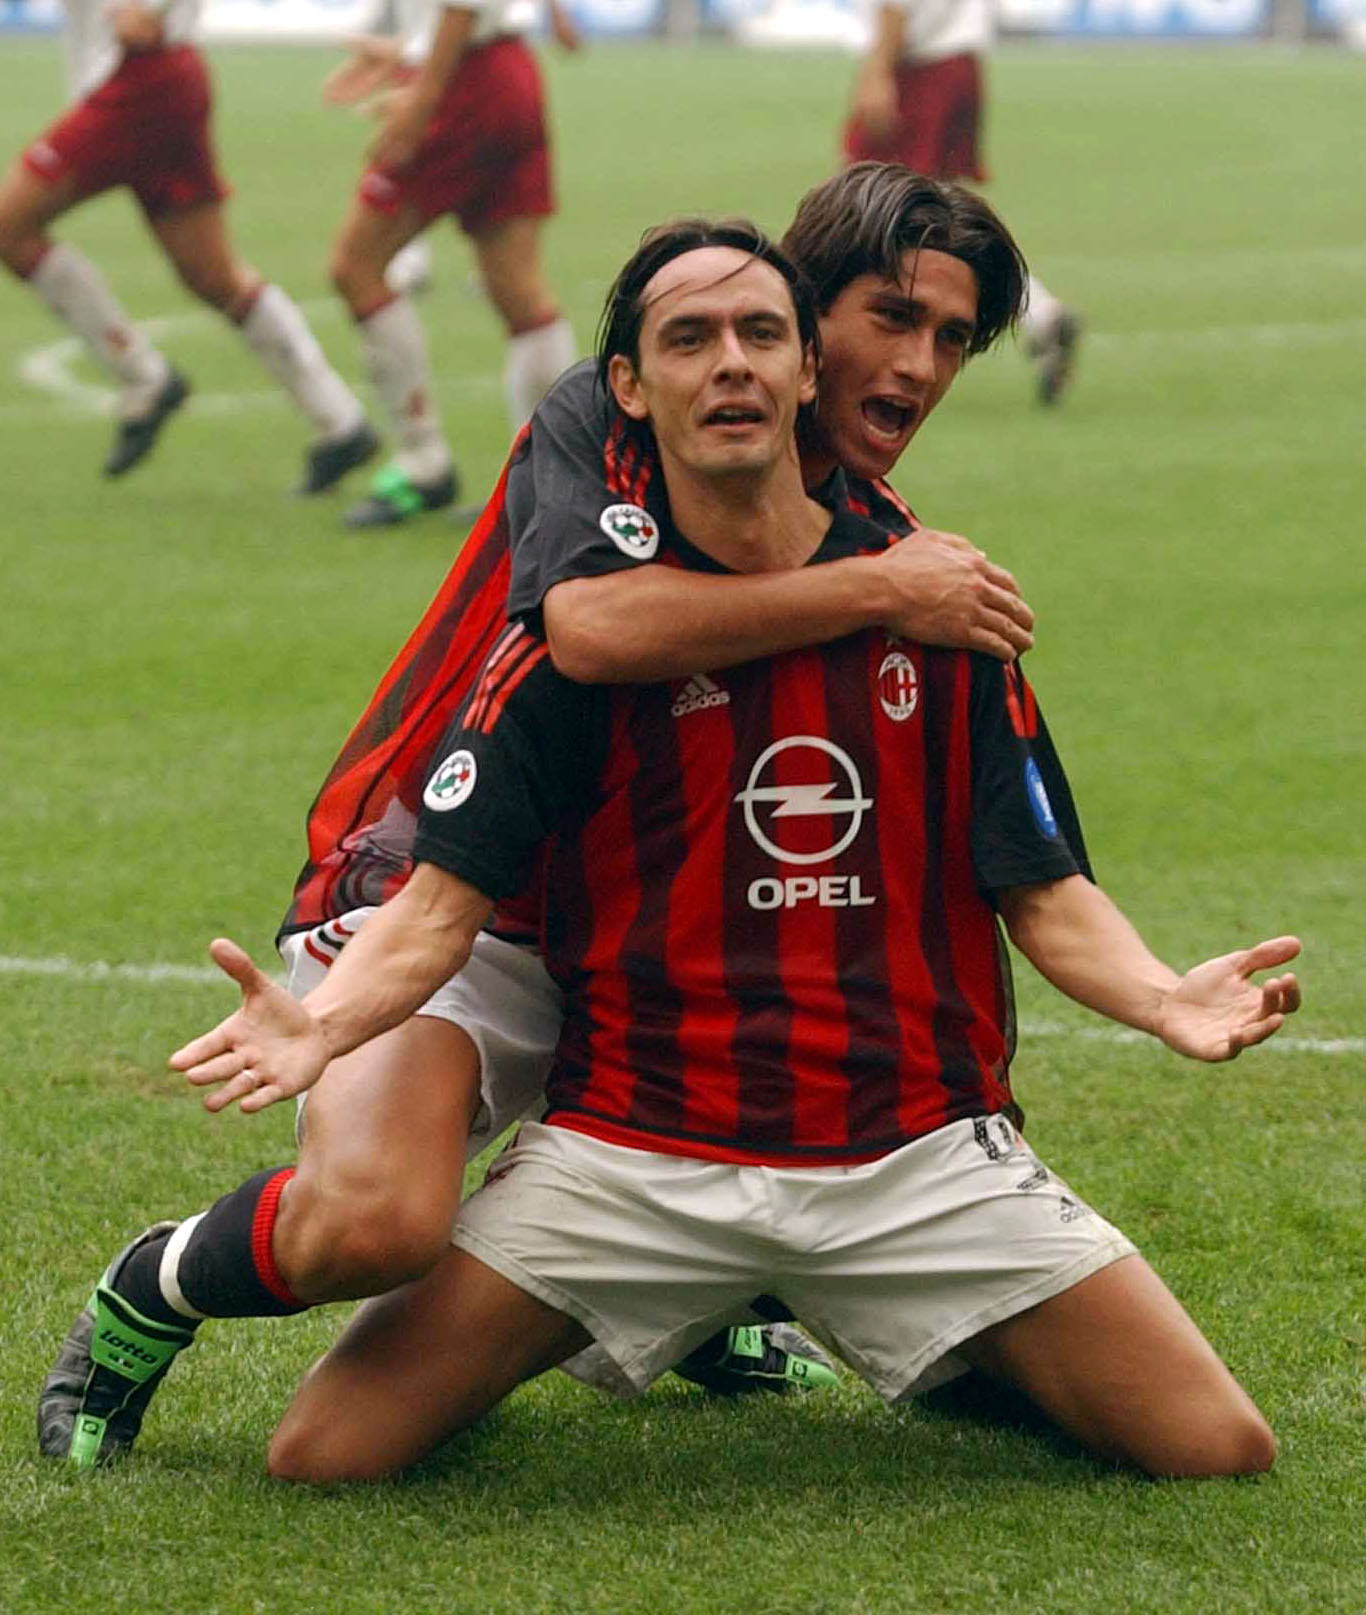 MILAN, ITALY - OCTOBER 6:  Filippo Inzaghi of AC Milan celebrates scoring during the Serie A match between AC MIlan and Torino, played at the 'Guiseppe Meazza' San Siro Stadium, Milan on October 6, 2002.  (Photo by Grazia Neri/Getty Images)